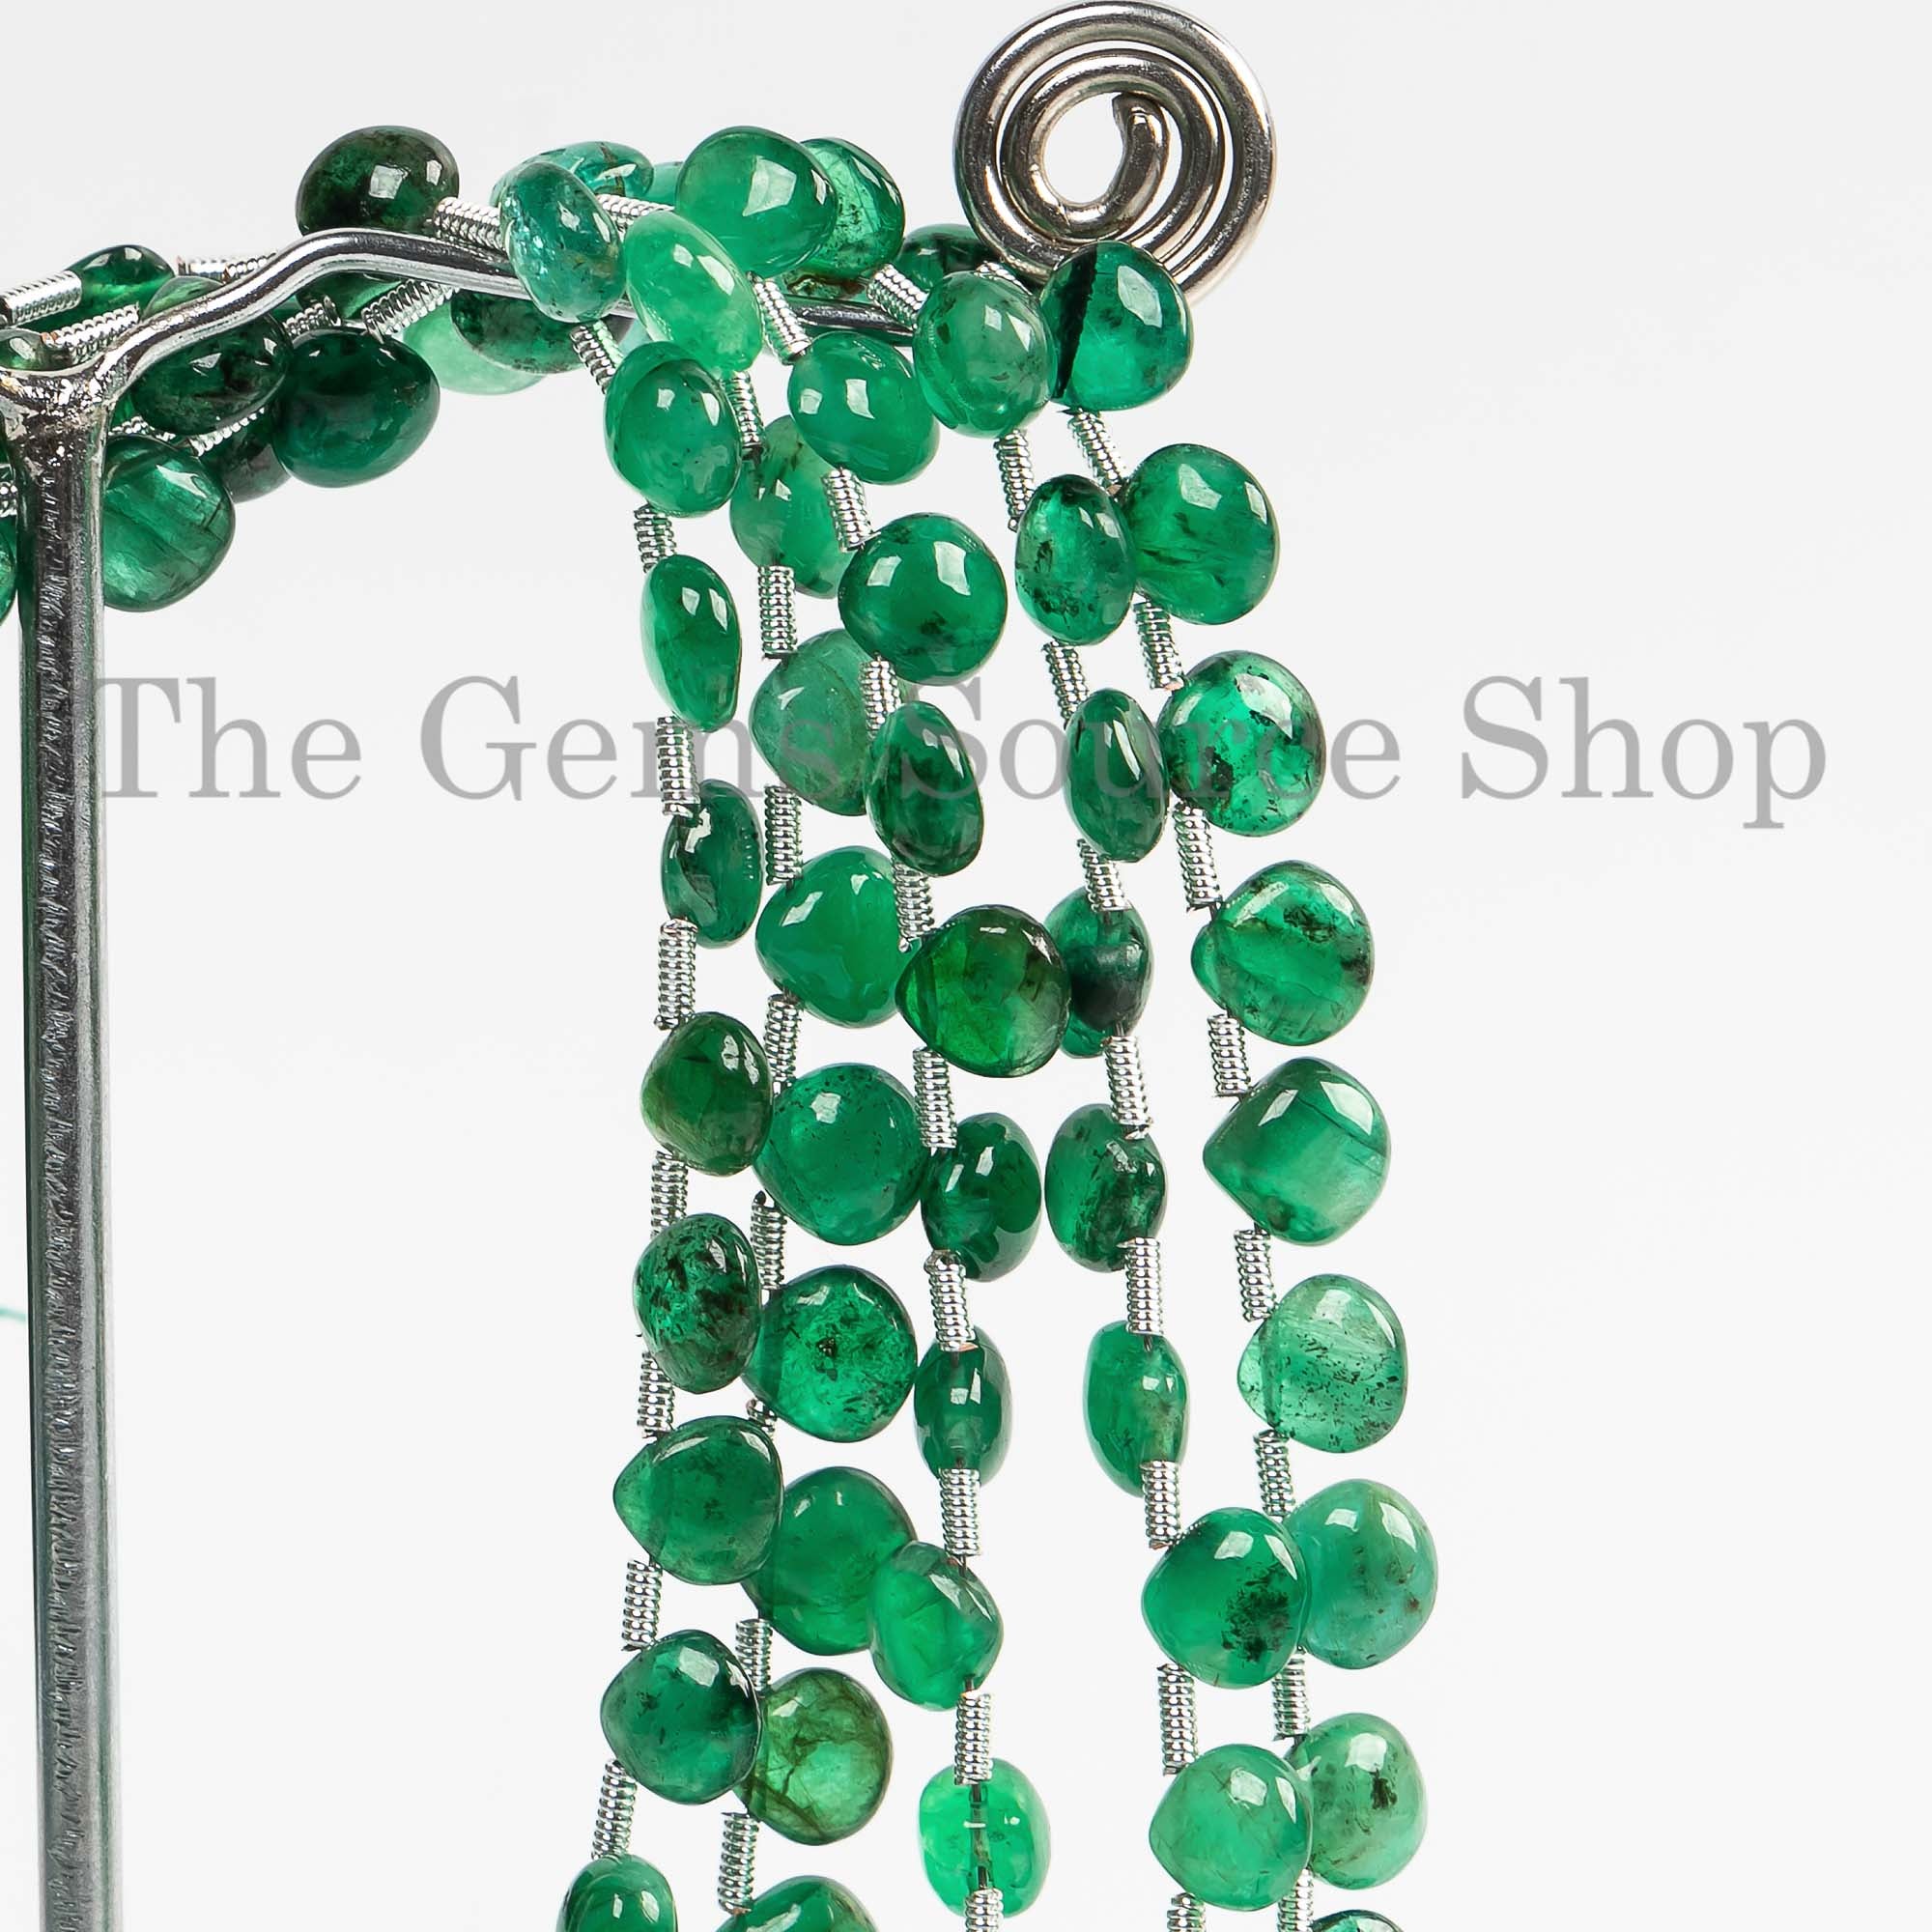 7" Shaded Emerald Smooth Heart 5-6 mm Gemstone Beads Strand for Jewelry Makings